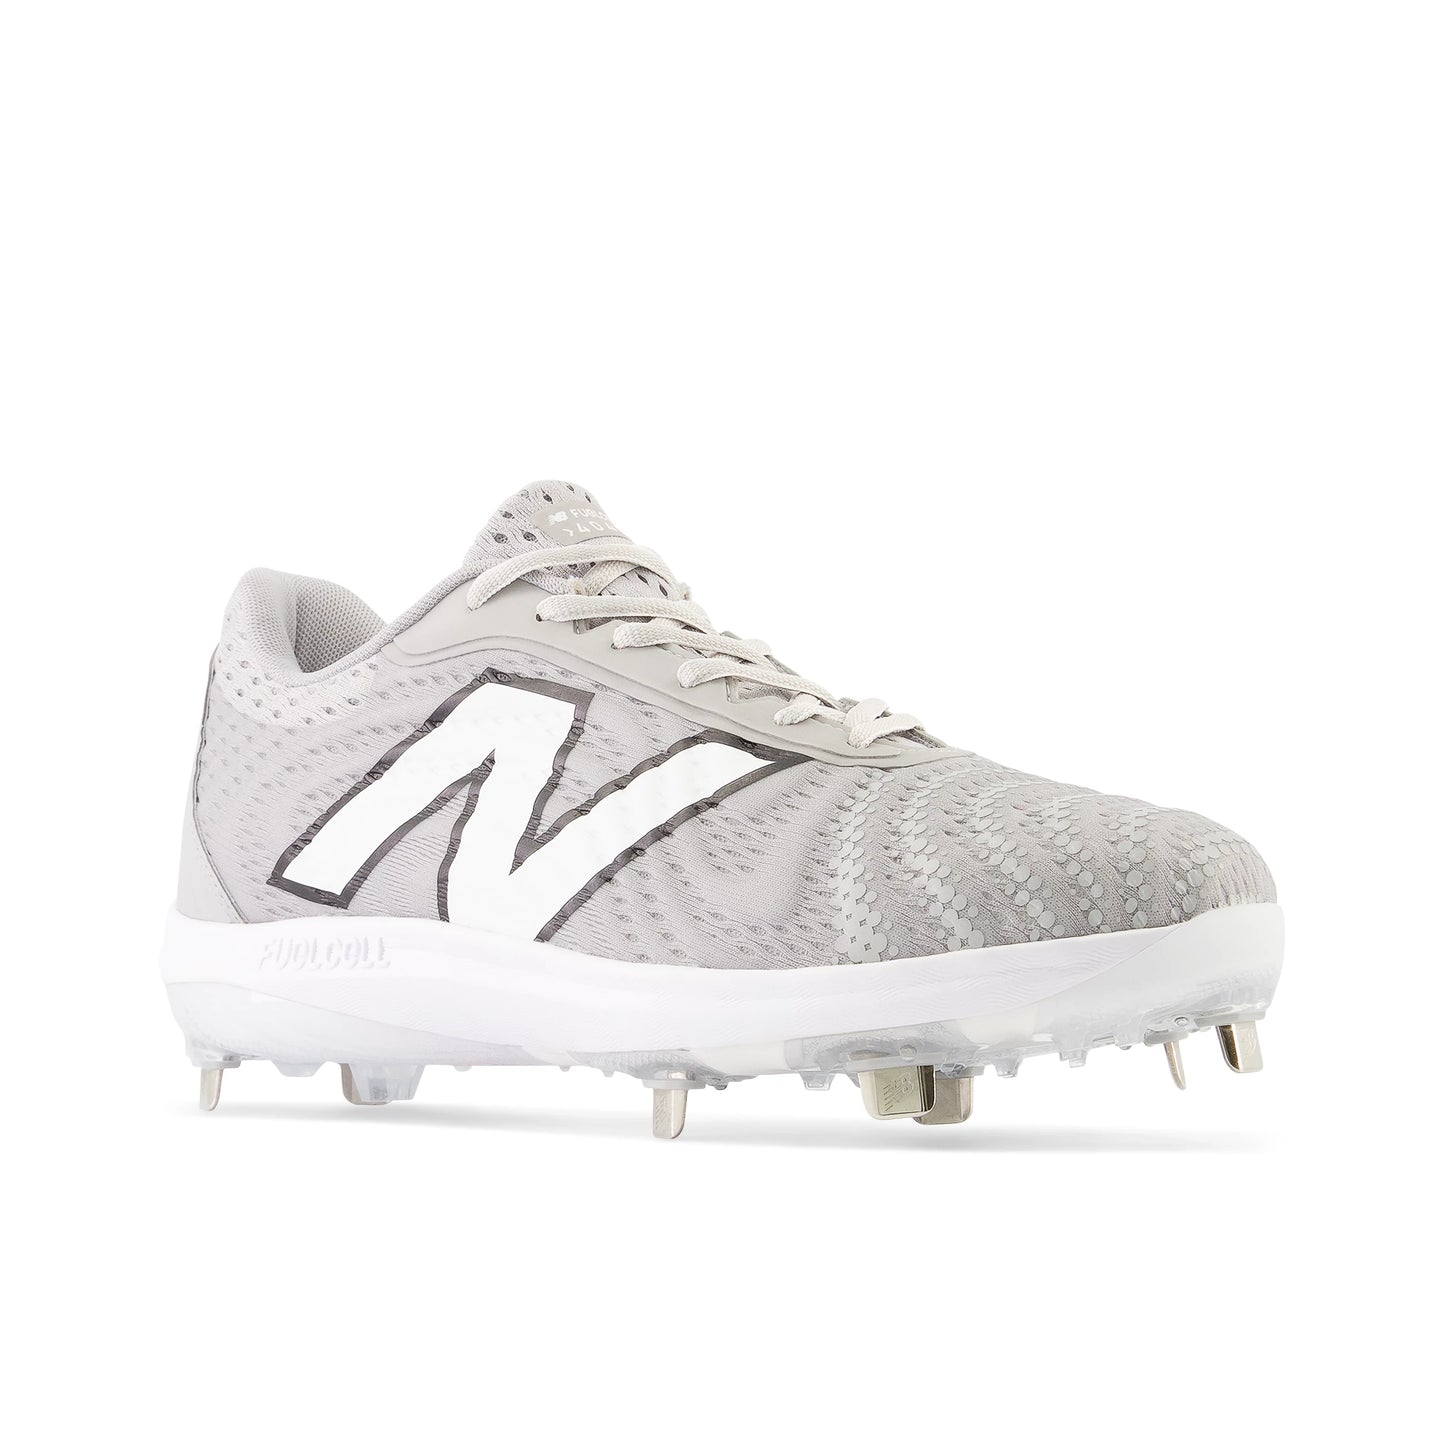 New Balance FuelCell 4040v7 L4040TG7 Metal